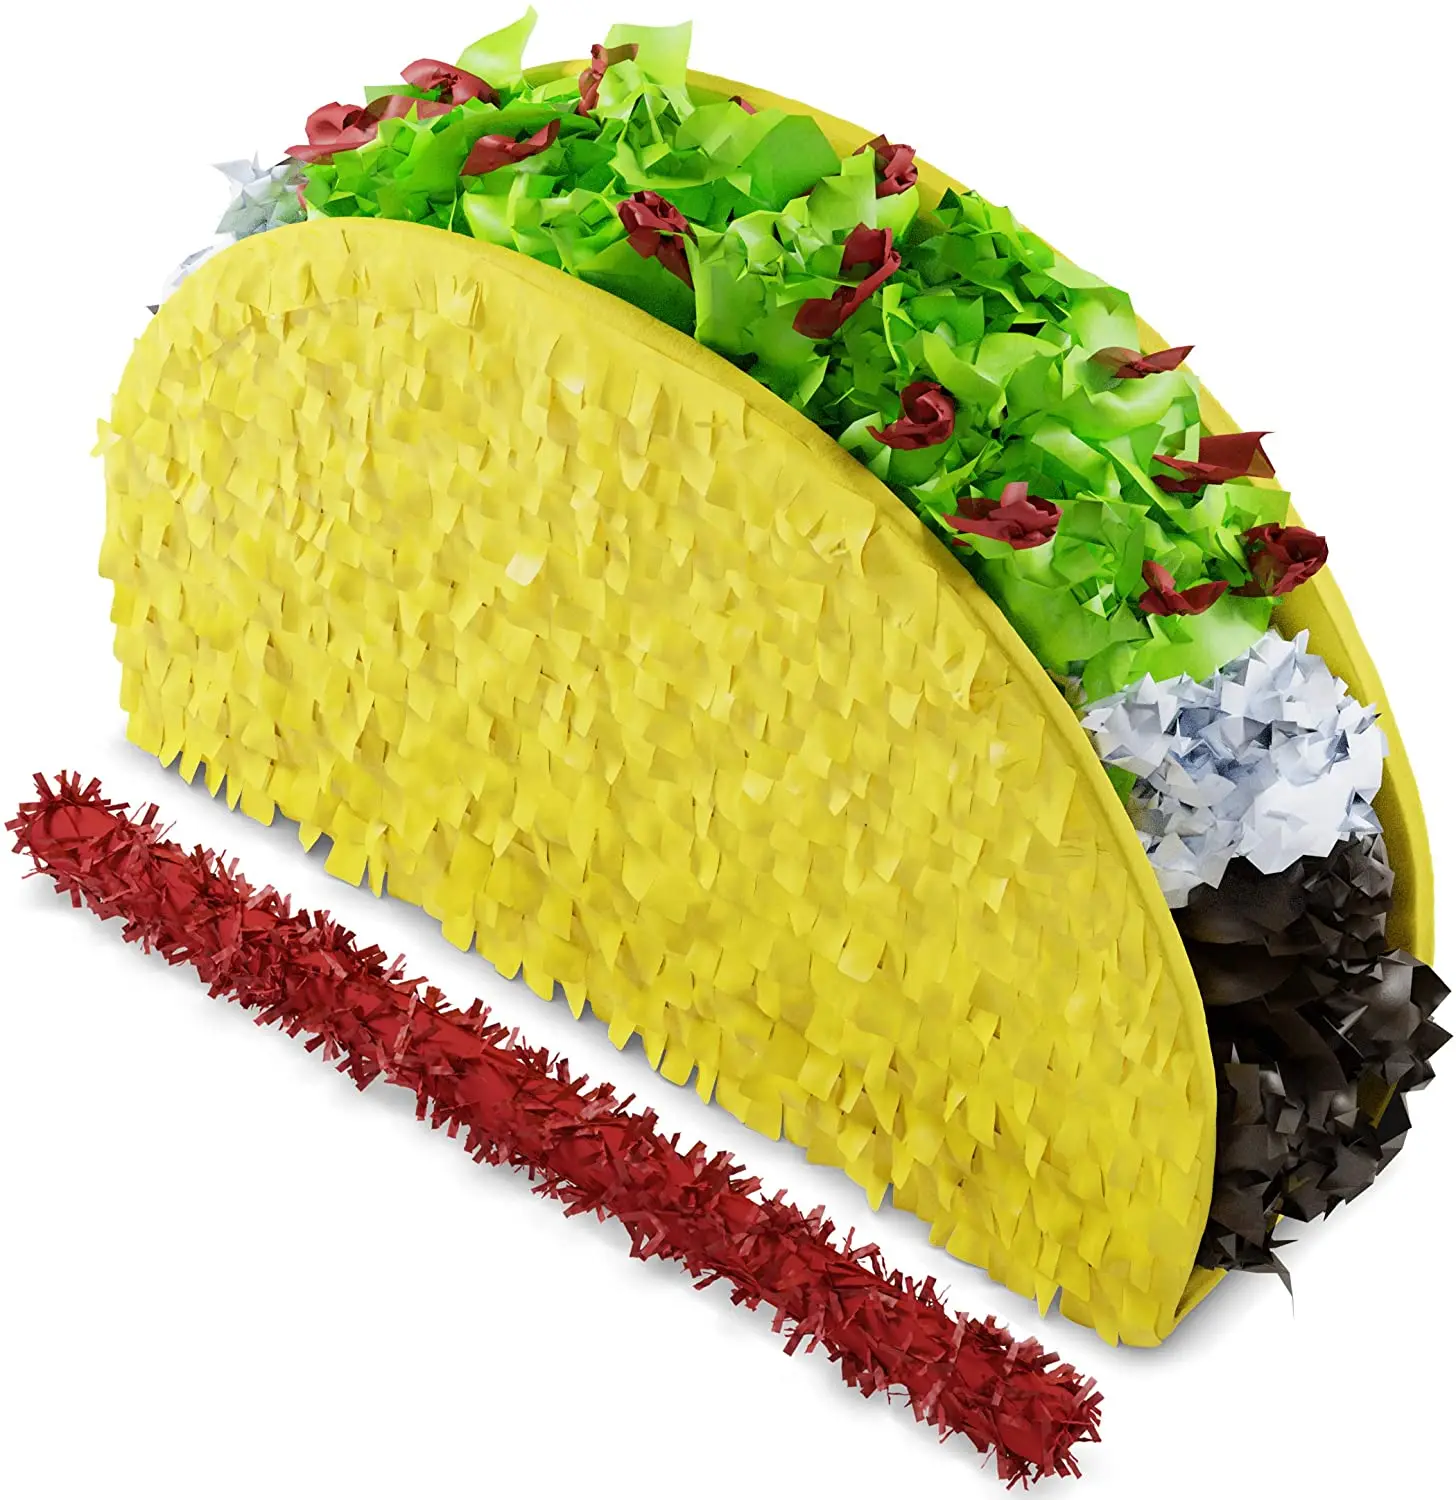 Mexican Bash 17.5 x 11 x 5 Perfect for Taco Bout Parties Taco Tuesday Pinata Small Stick Included by Get a pinata Decorations Fiesta Theme Celebration Photo Prop Birthday piñata 